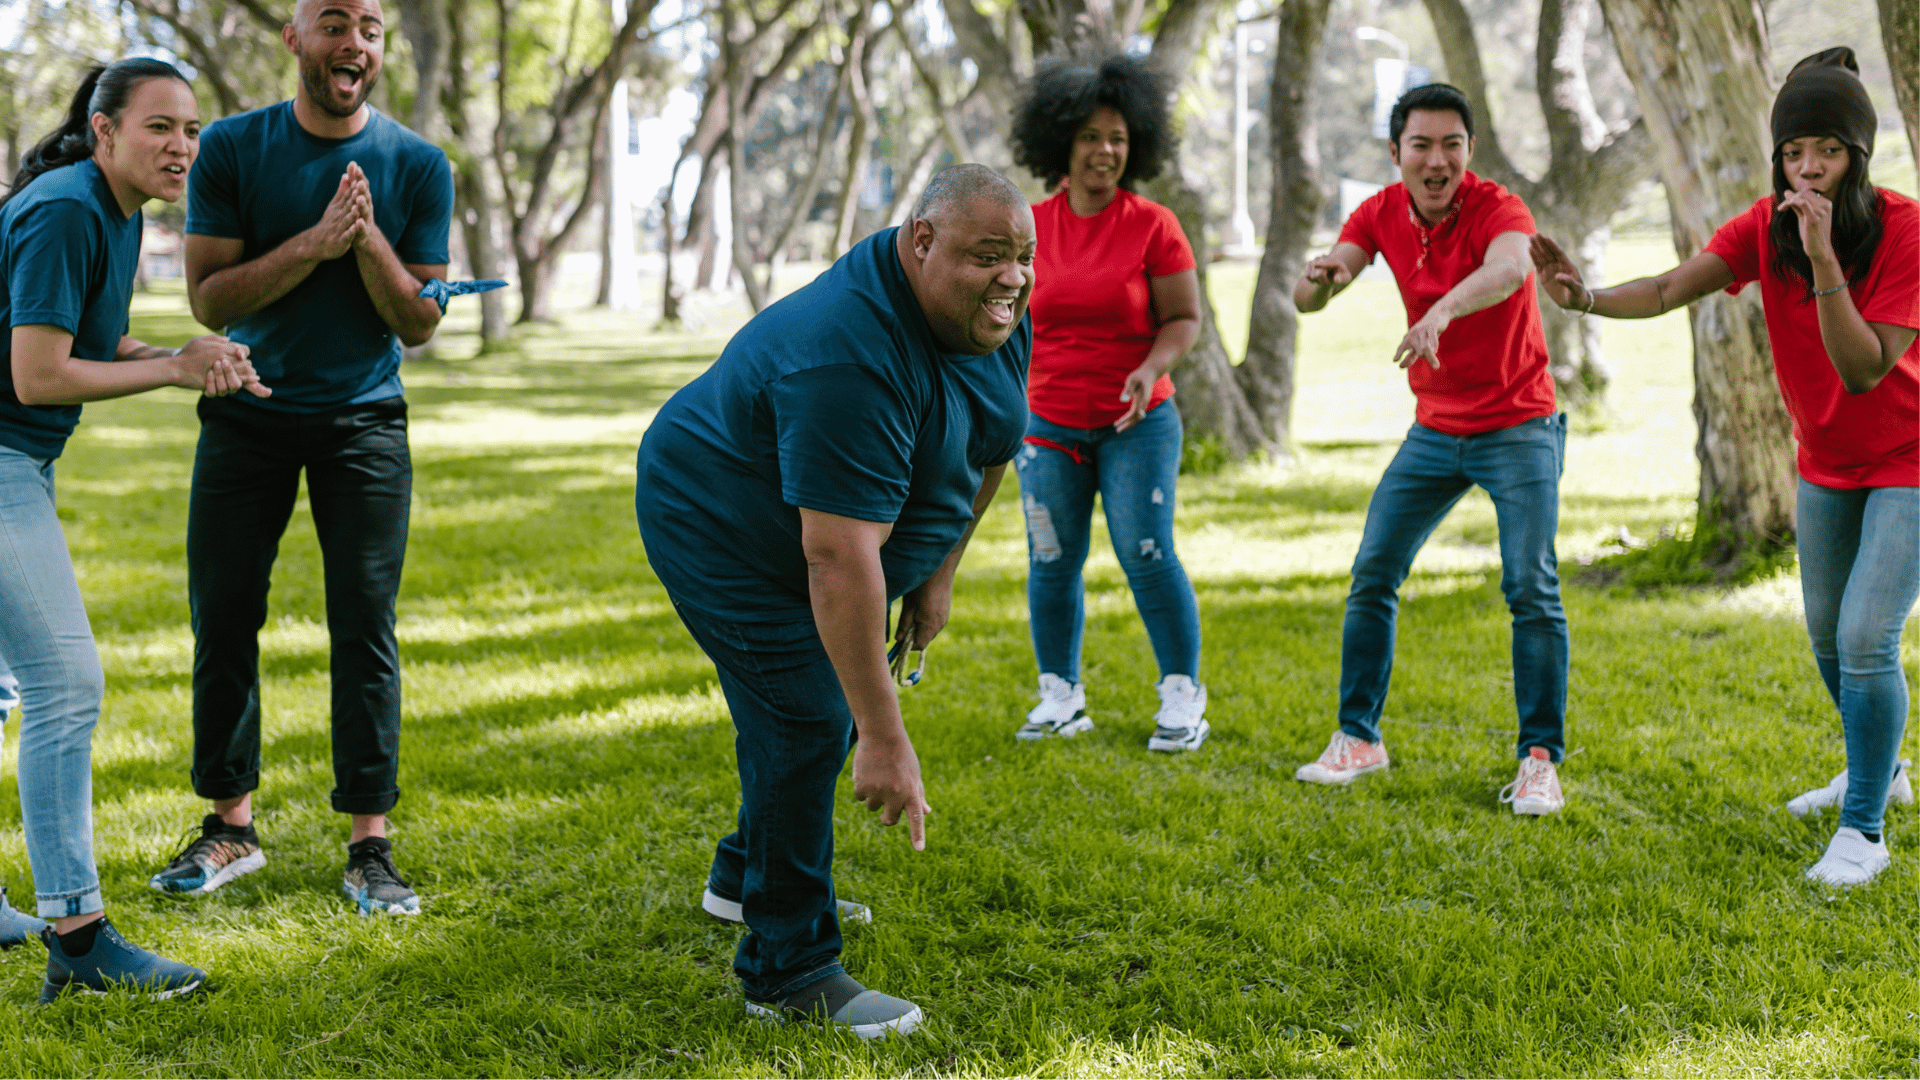 Adults having fun playing a game outdoors